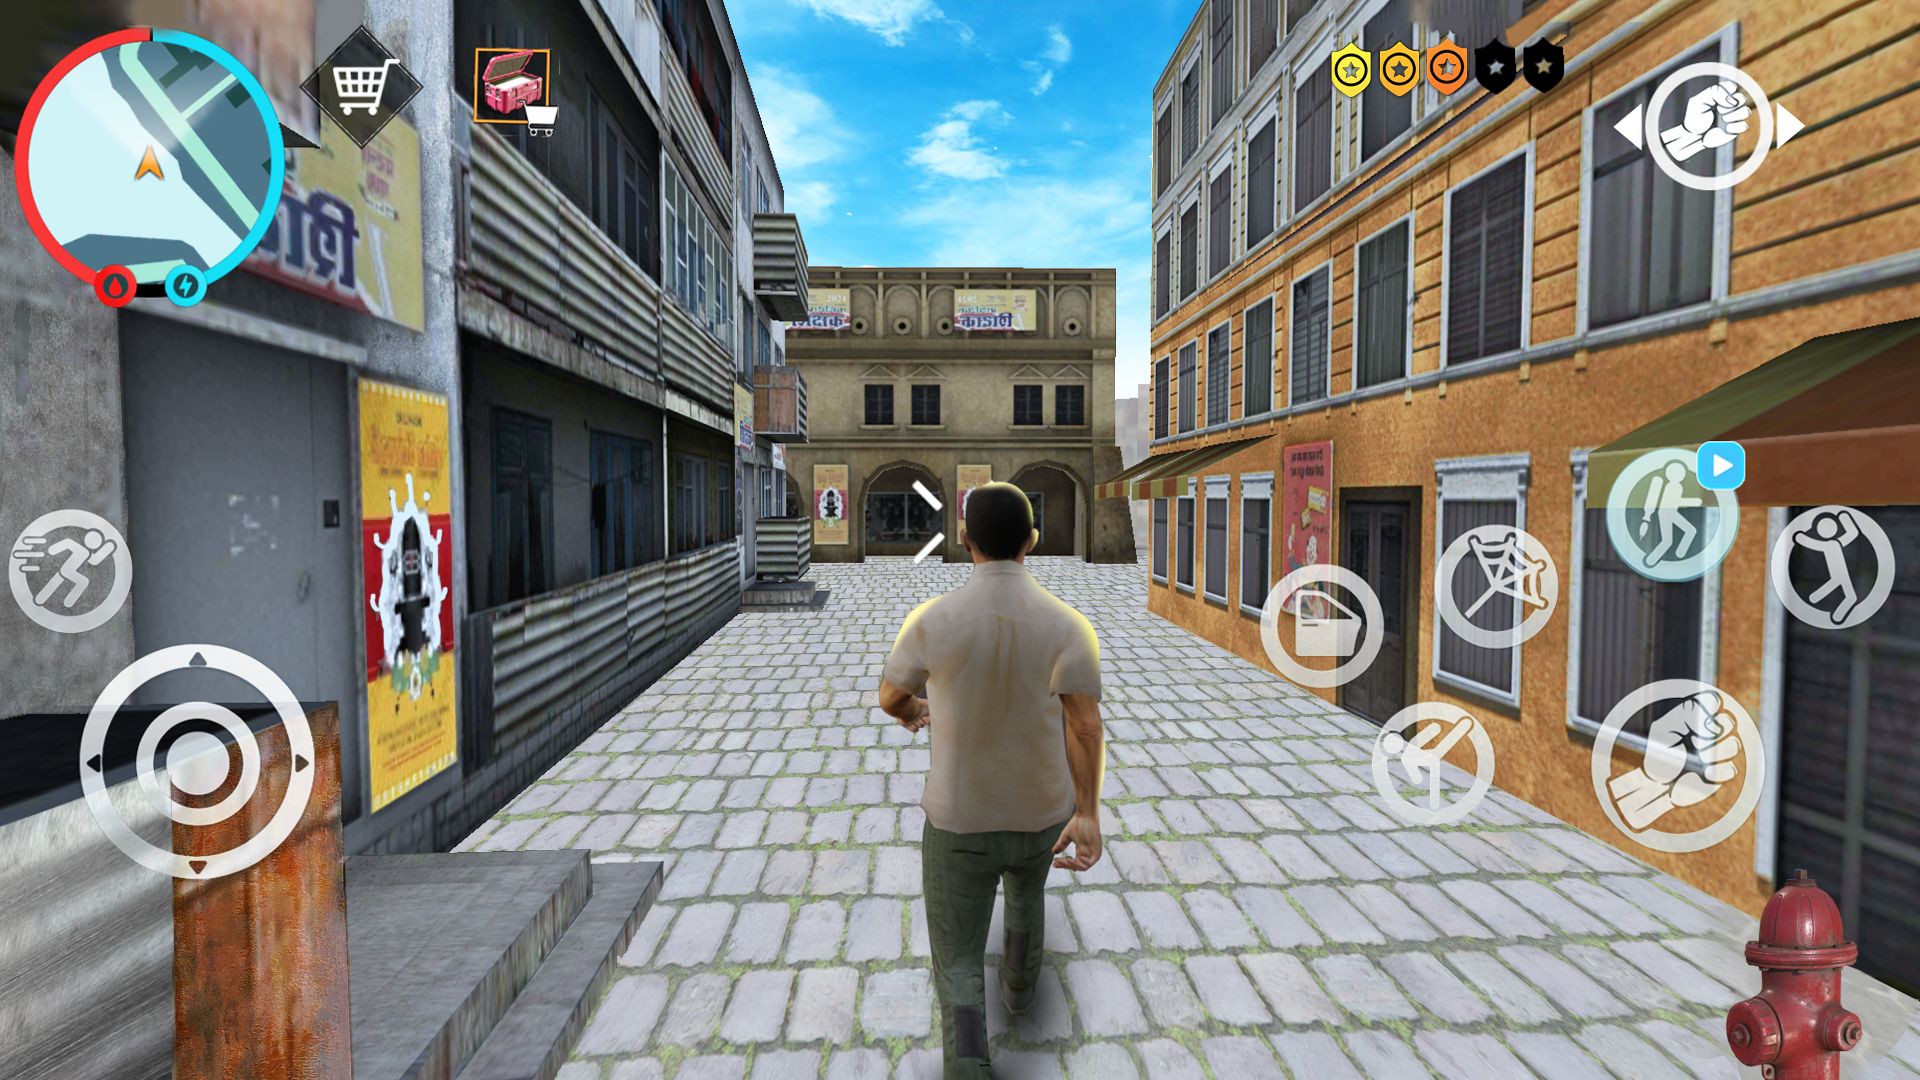 Gangster party: Gangland war - Android game screenshots.